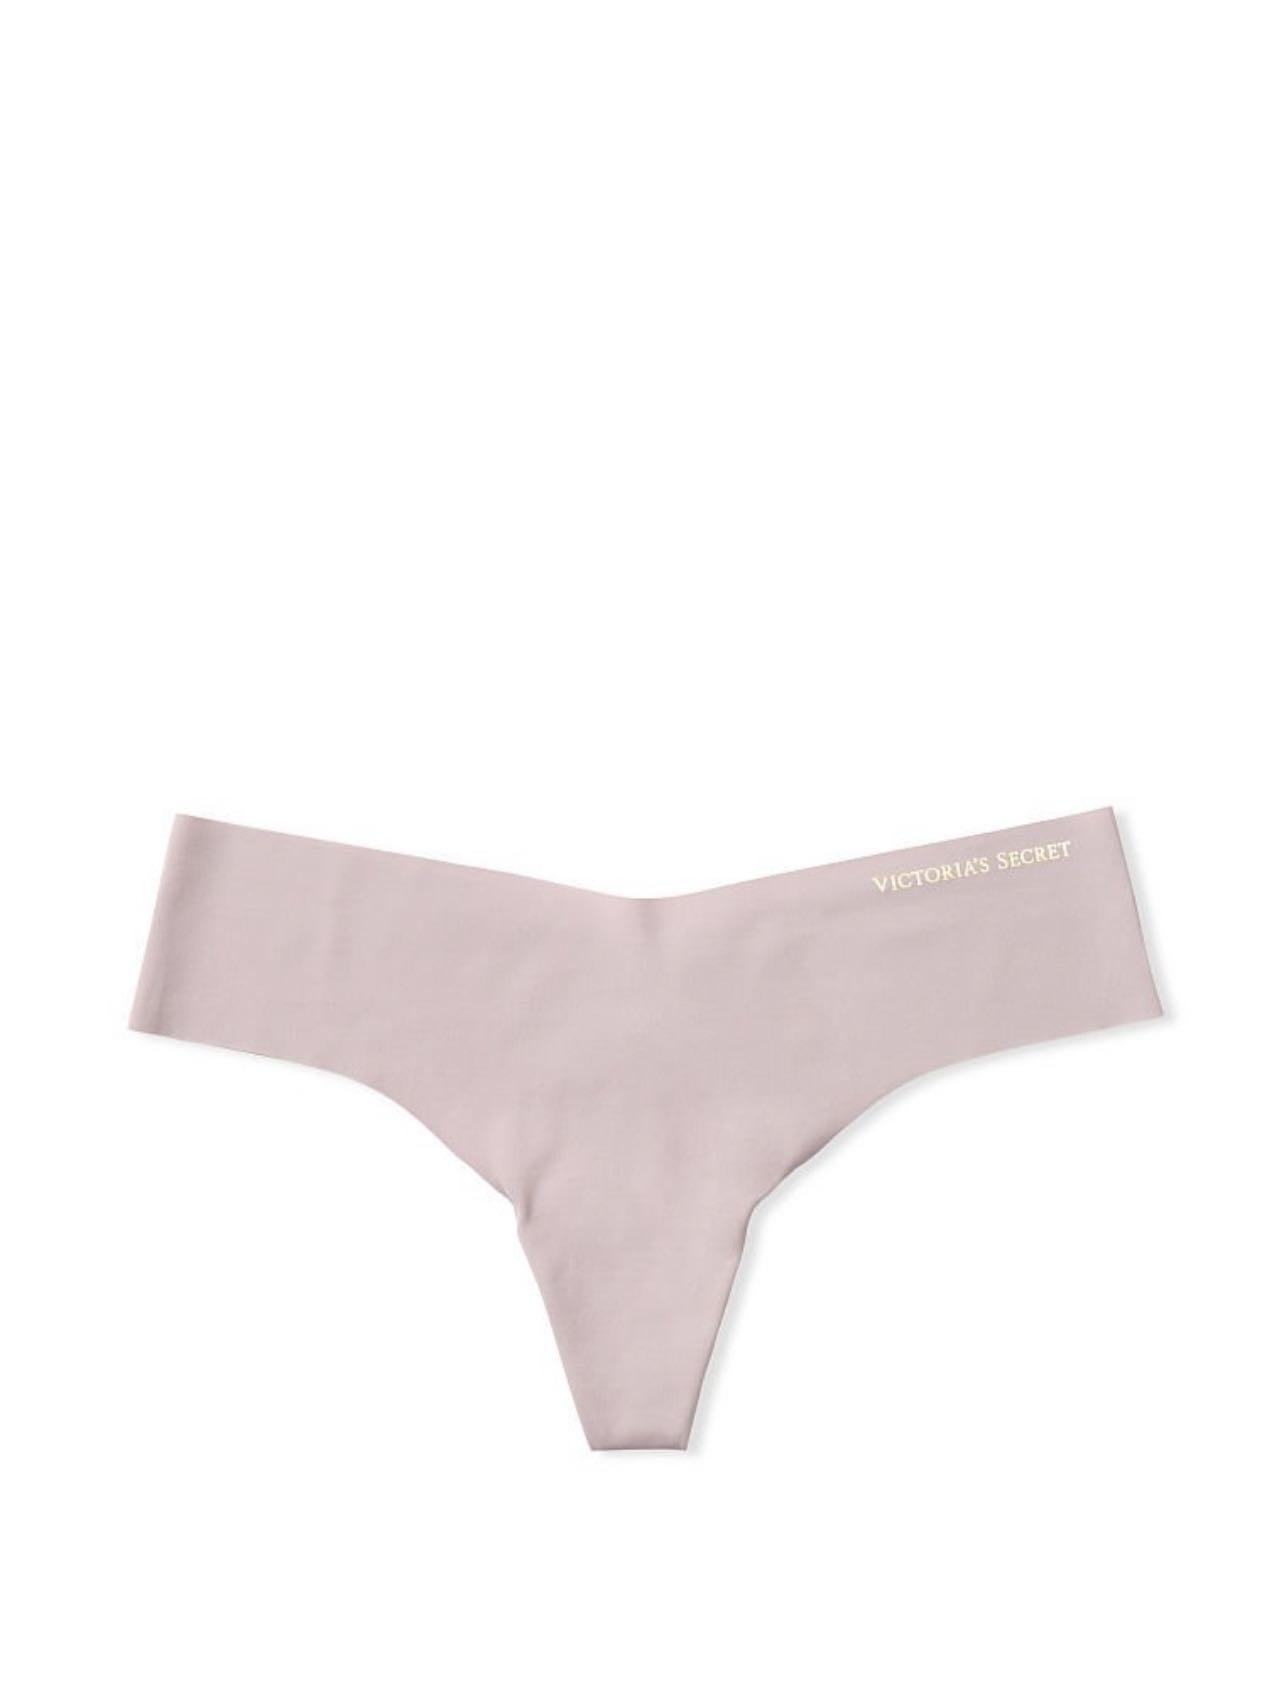 Buy Victoria's Secret PINK No Show Thong from the Victoria's